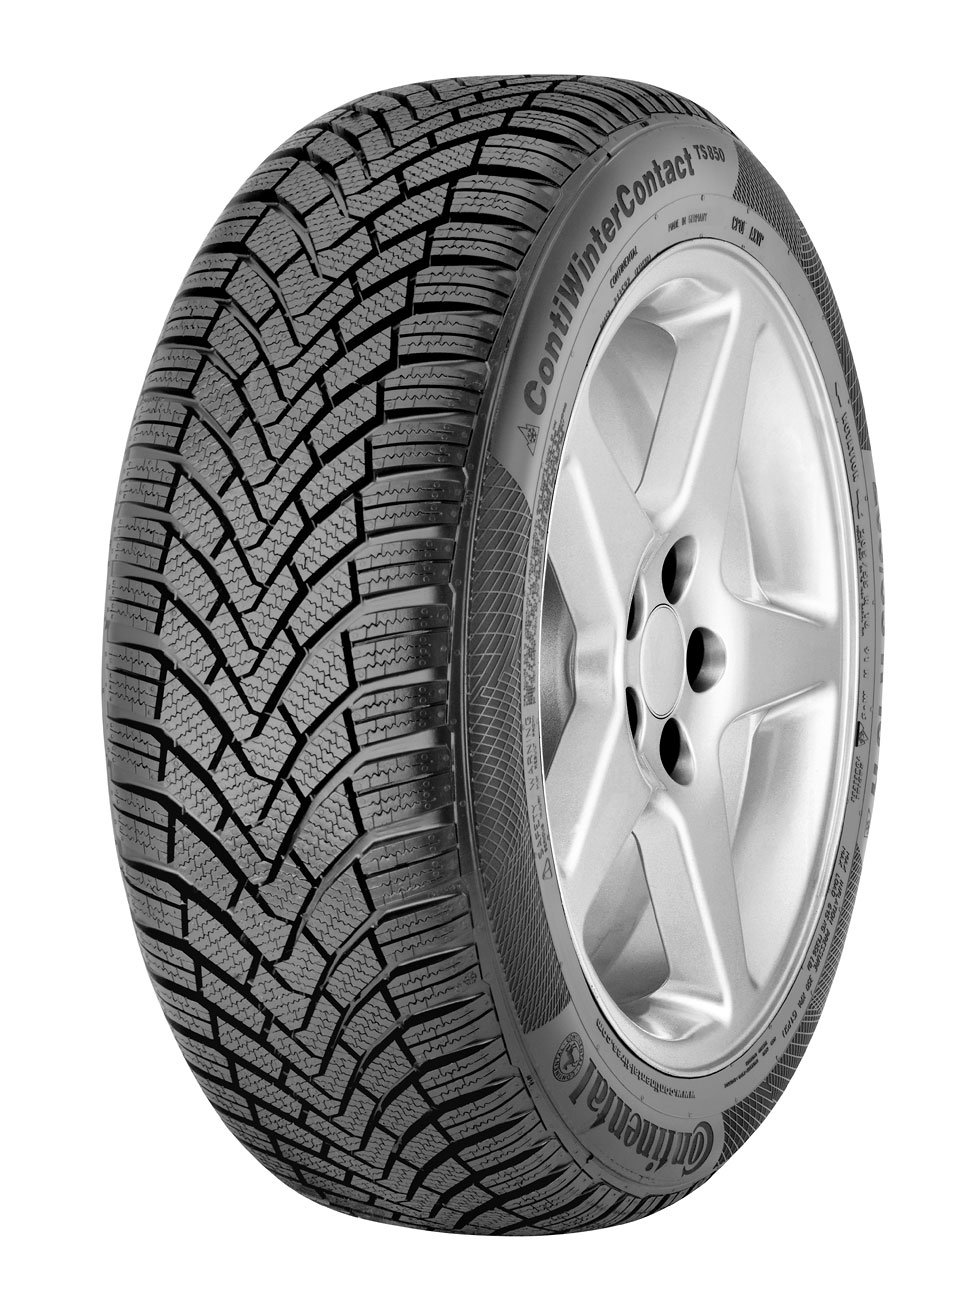 CONTINENTAL WINTER CONTACT TS850P 225/35R1887W